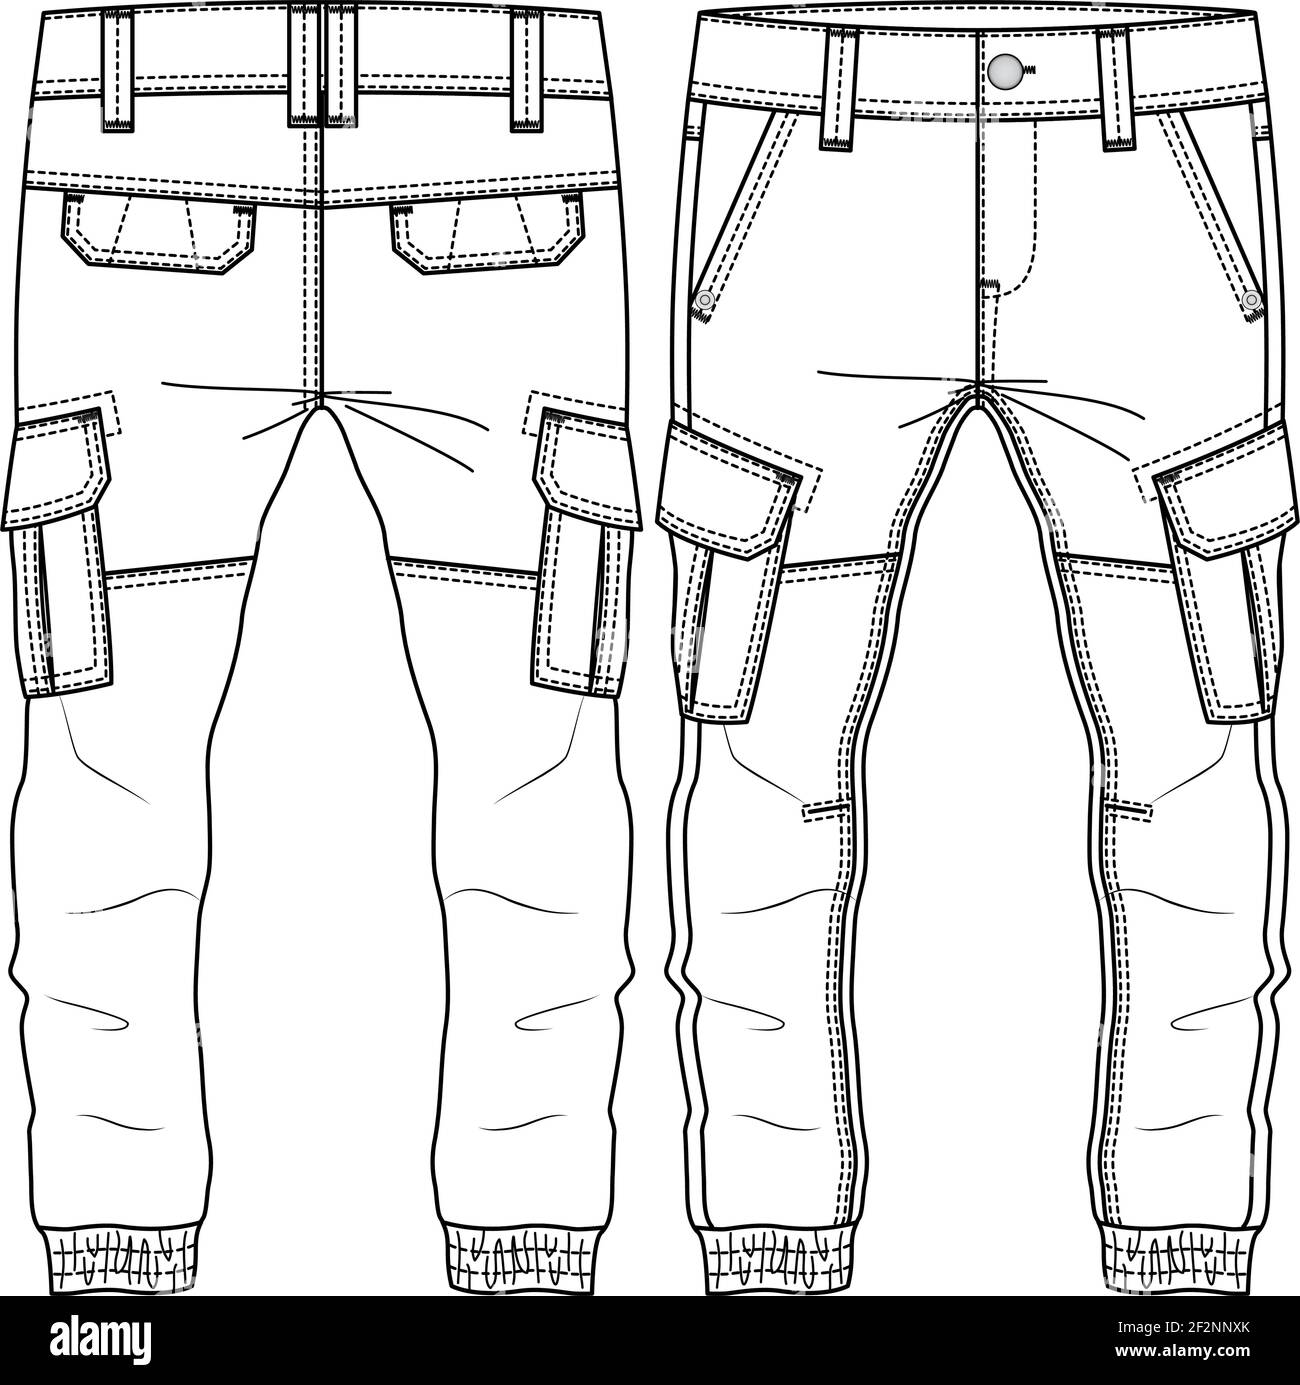 Men Boys Cargo Pocket Pant fashion flat sketch template. Technical Fashion Illustration. Woven CAD. Cut and sew detail with Back Pocket Flap Stock Vector